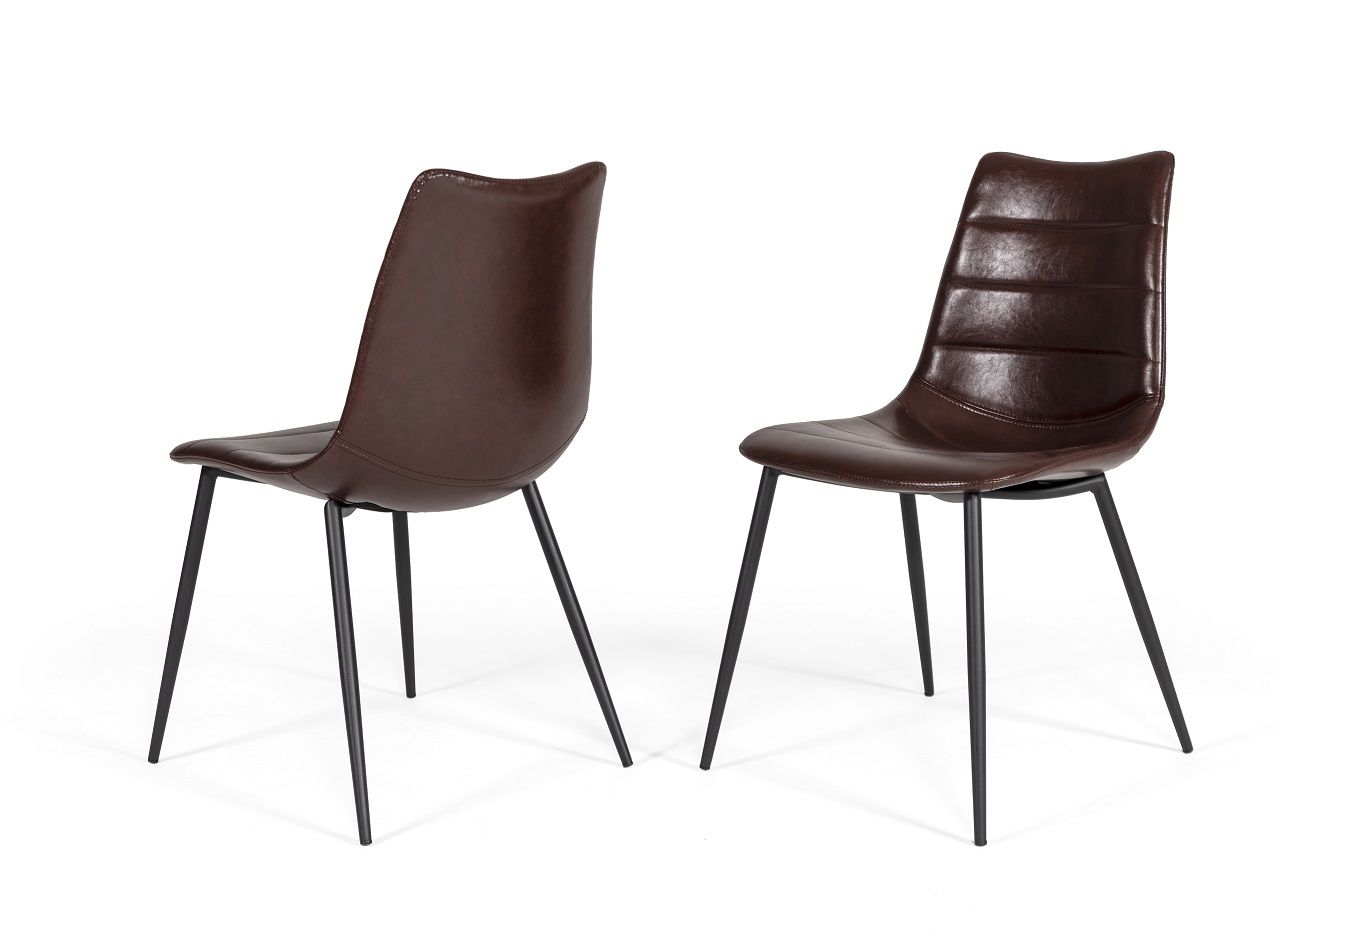 Gilliam - Modern Brown Dining Chair (Set of 2) - Dining Chairs - Dining ...